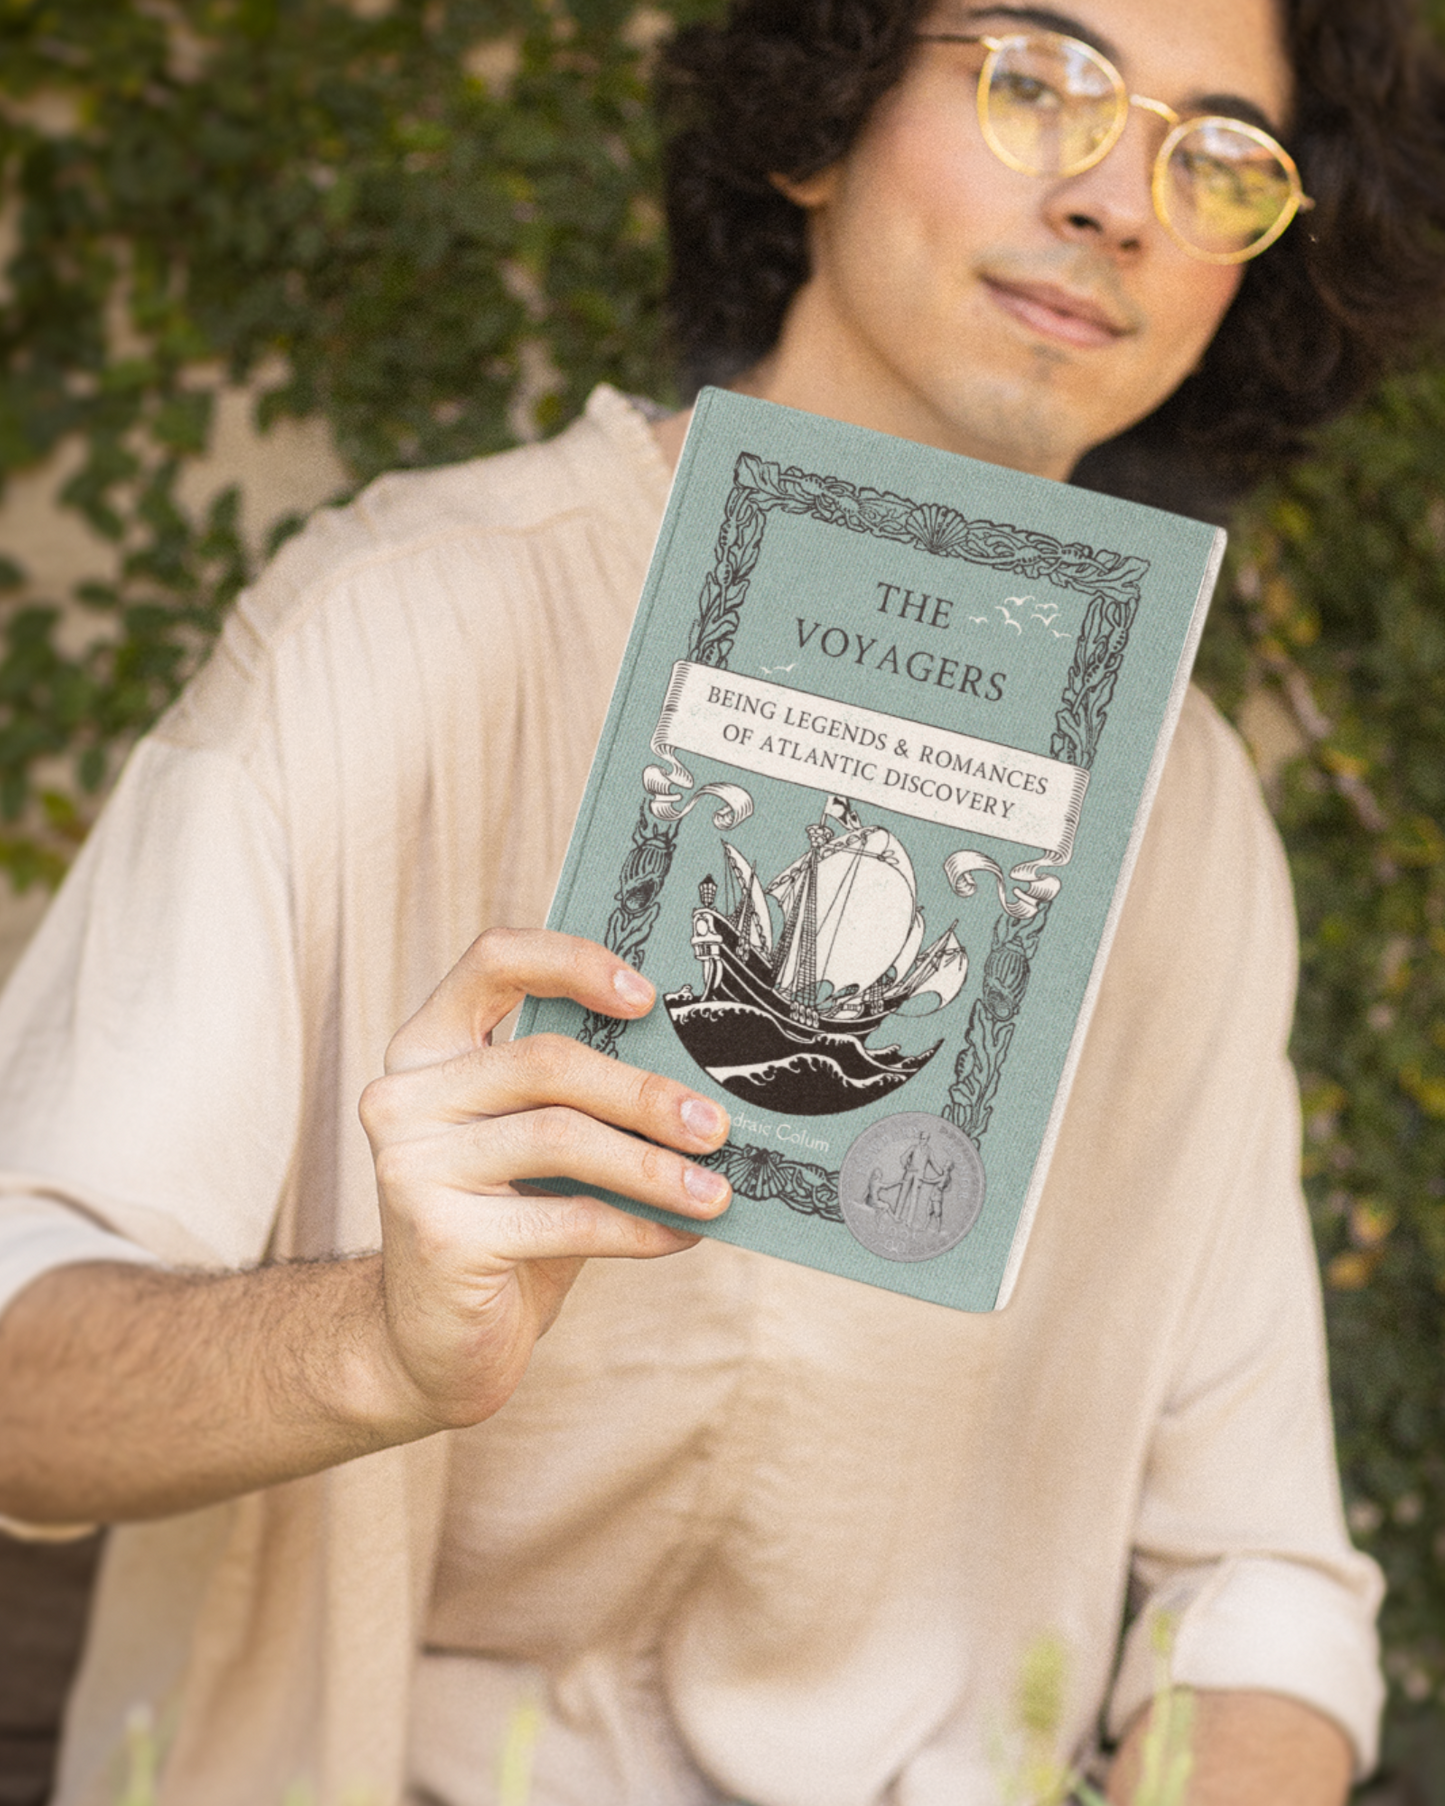 Paperback with teal cover of "The Voyagers: Being Legends & Romances of Atlantic Discovery" held by dark-haired young man in front of a wall of vines.